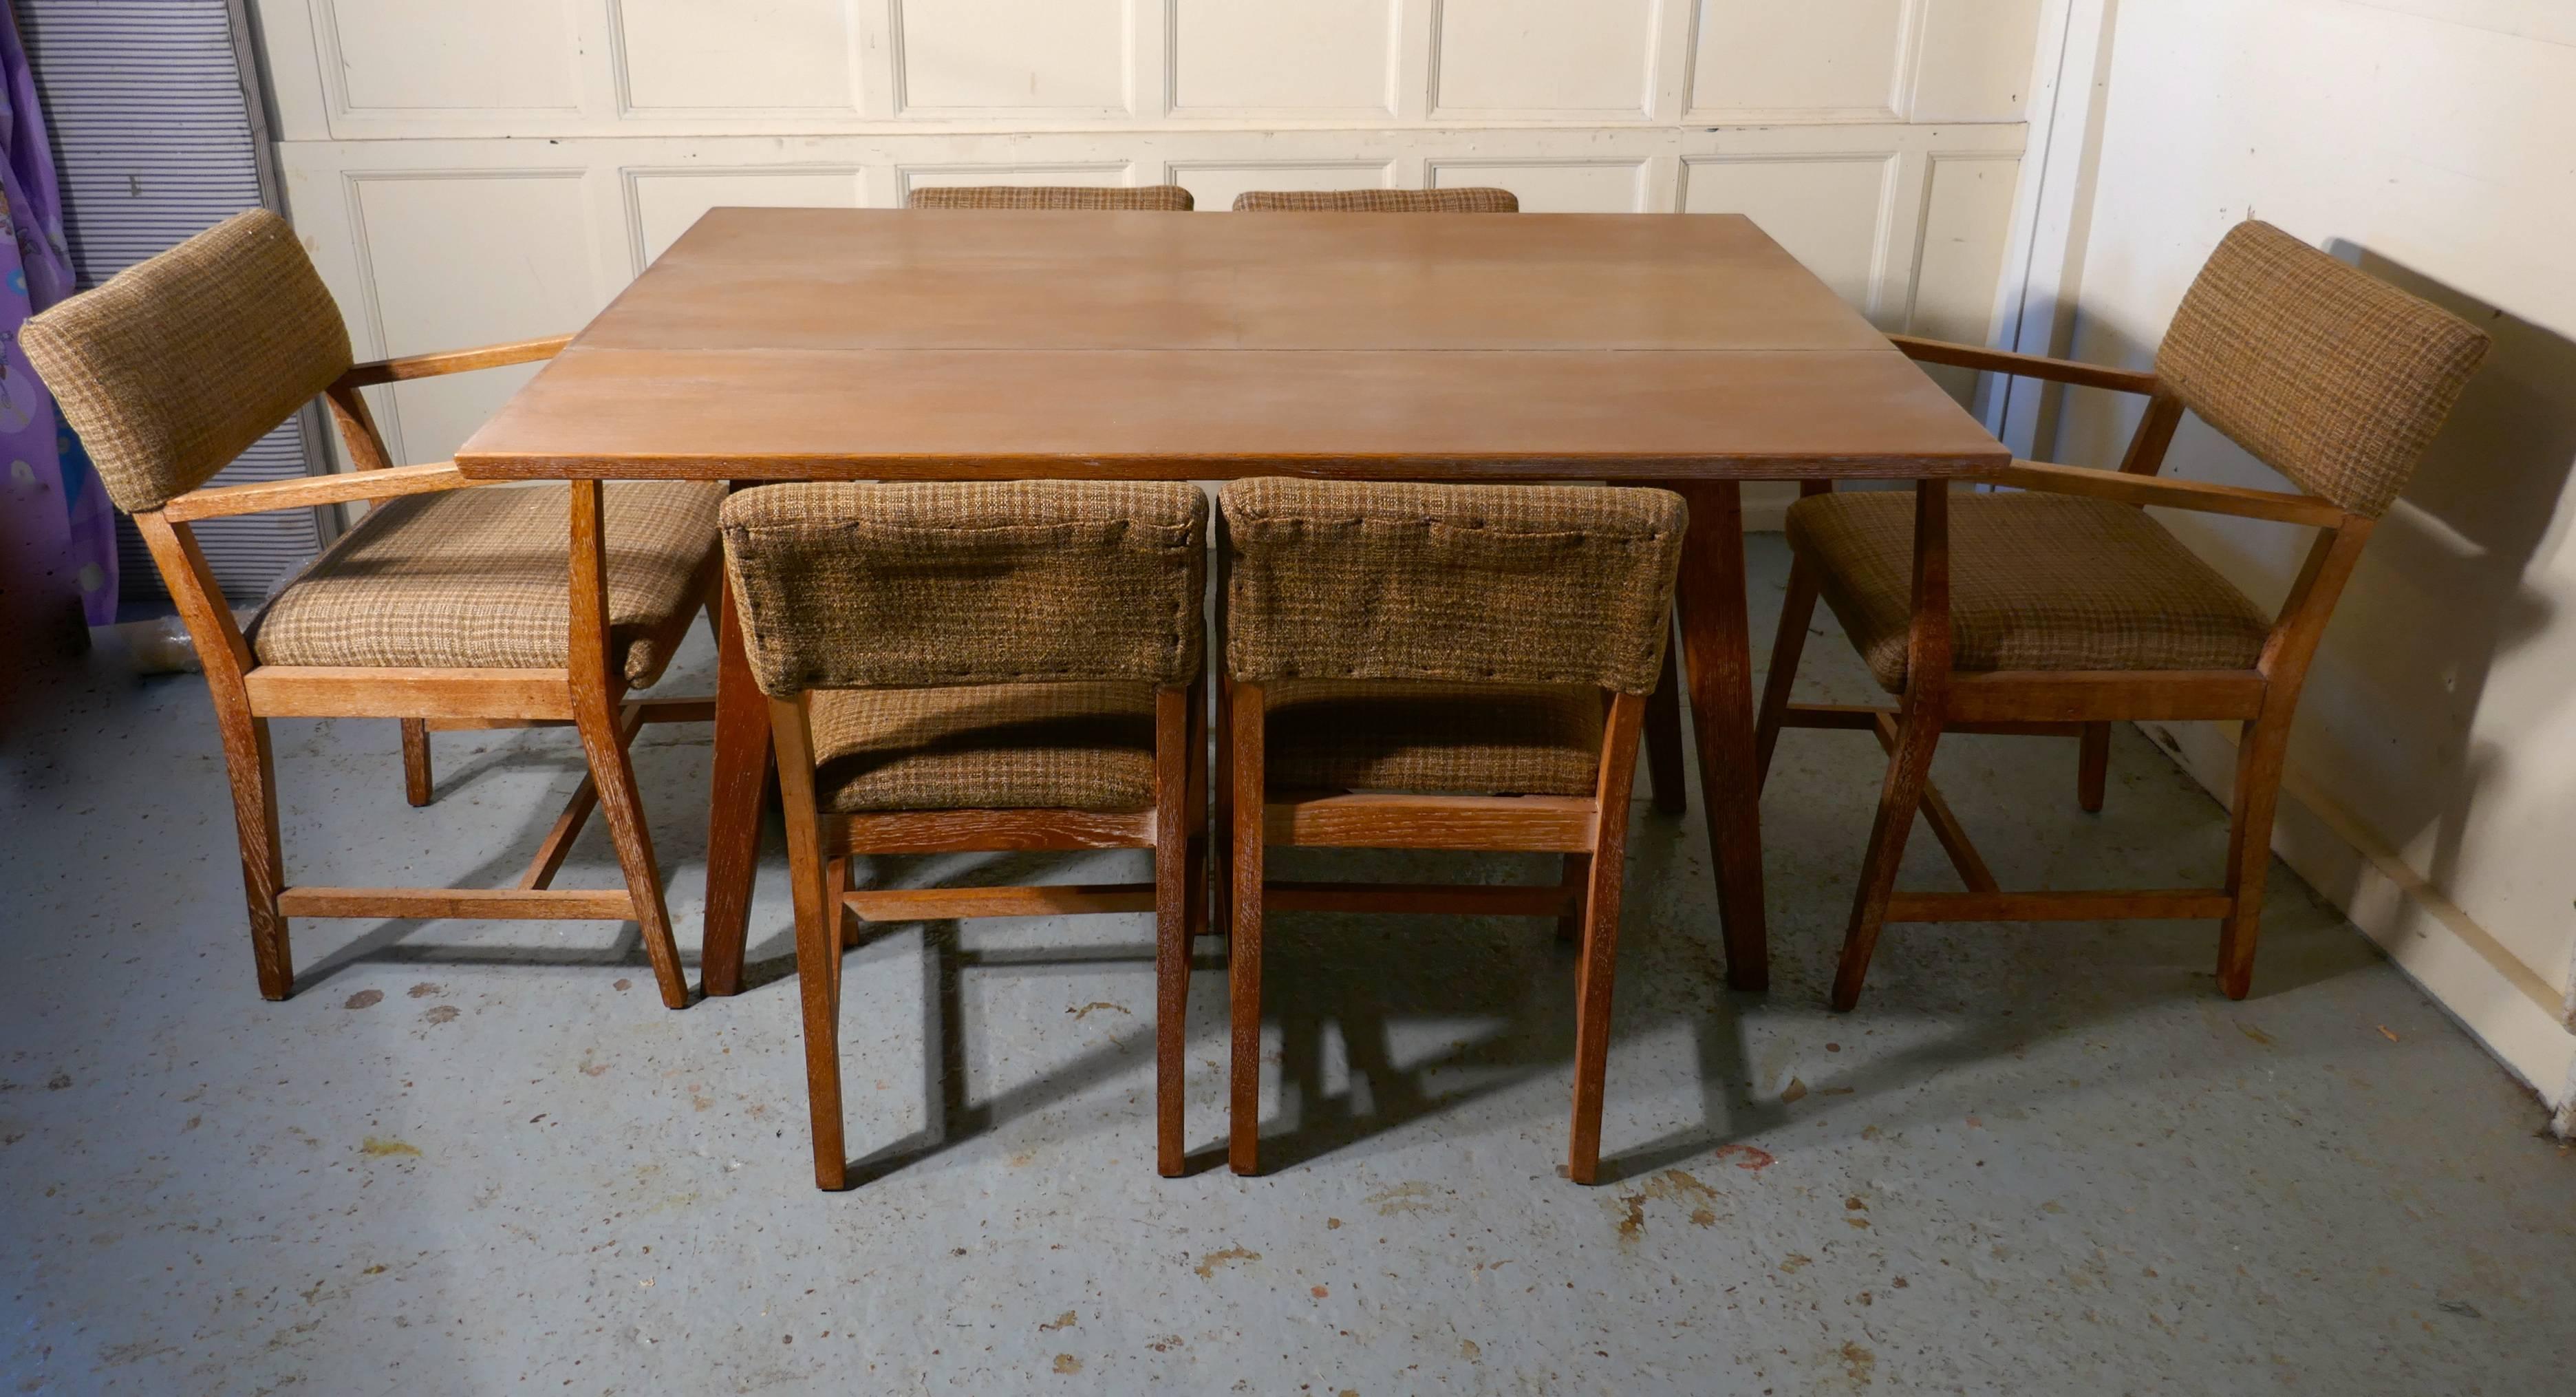 1950s limed oak extending dining table and set of six chairs

A very rare set, the splay legged table pulls apart in the centre allowing a centre leaf to pop up making a small narrow table into large six-seat dining table
The set is in limed oak,